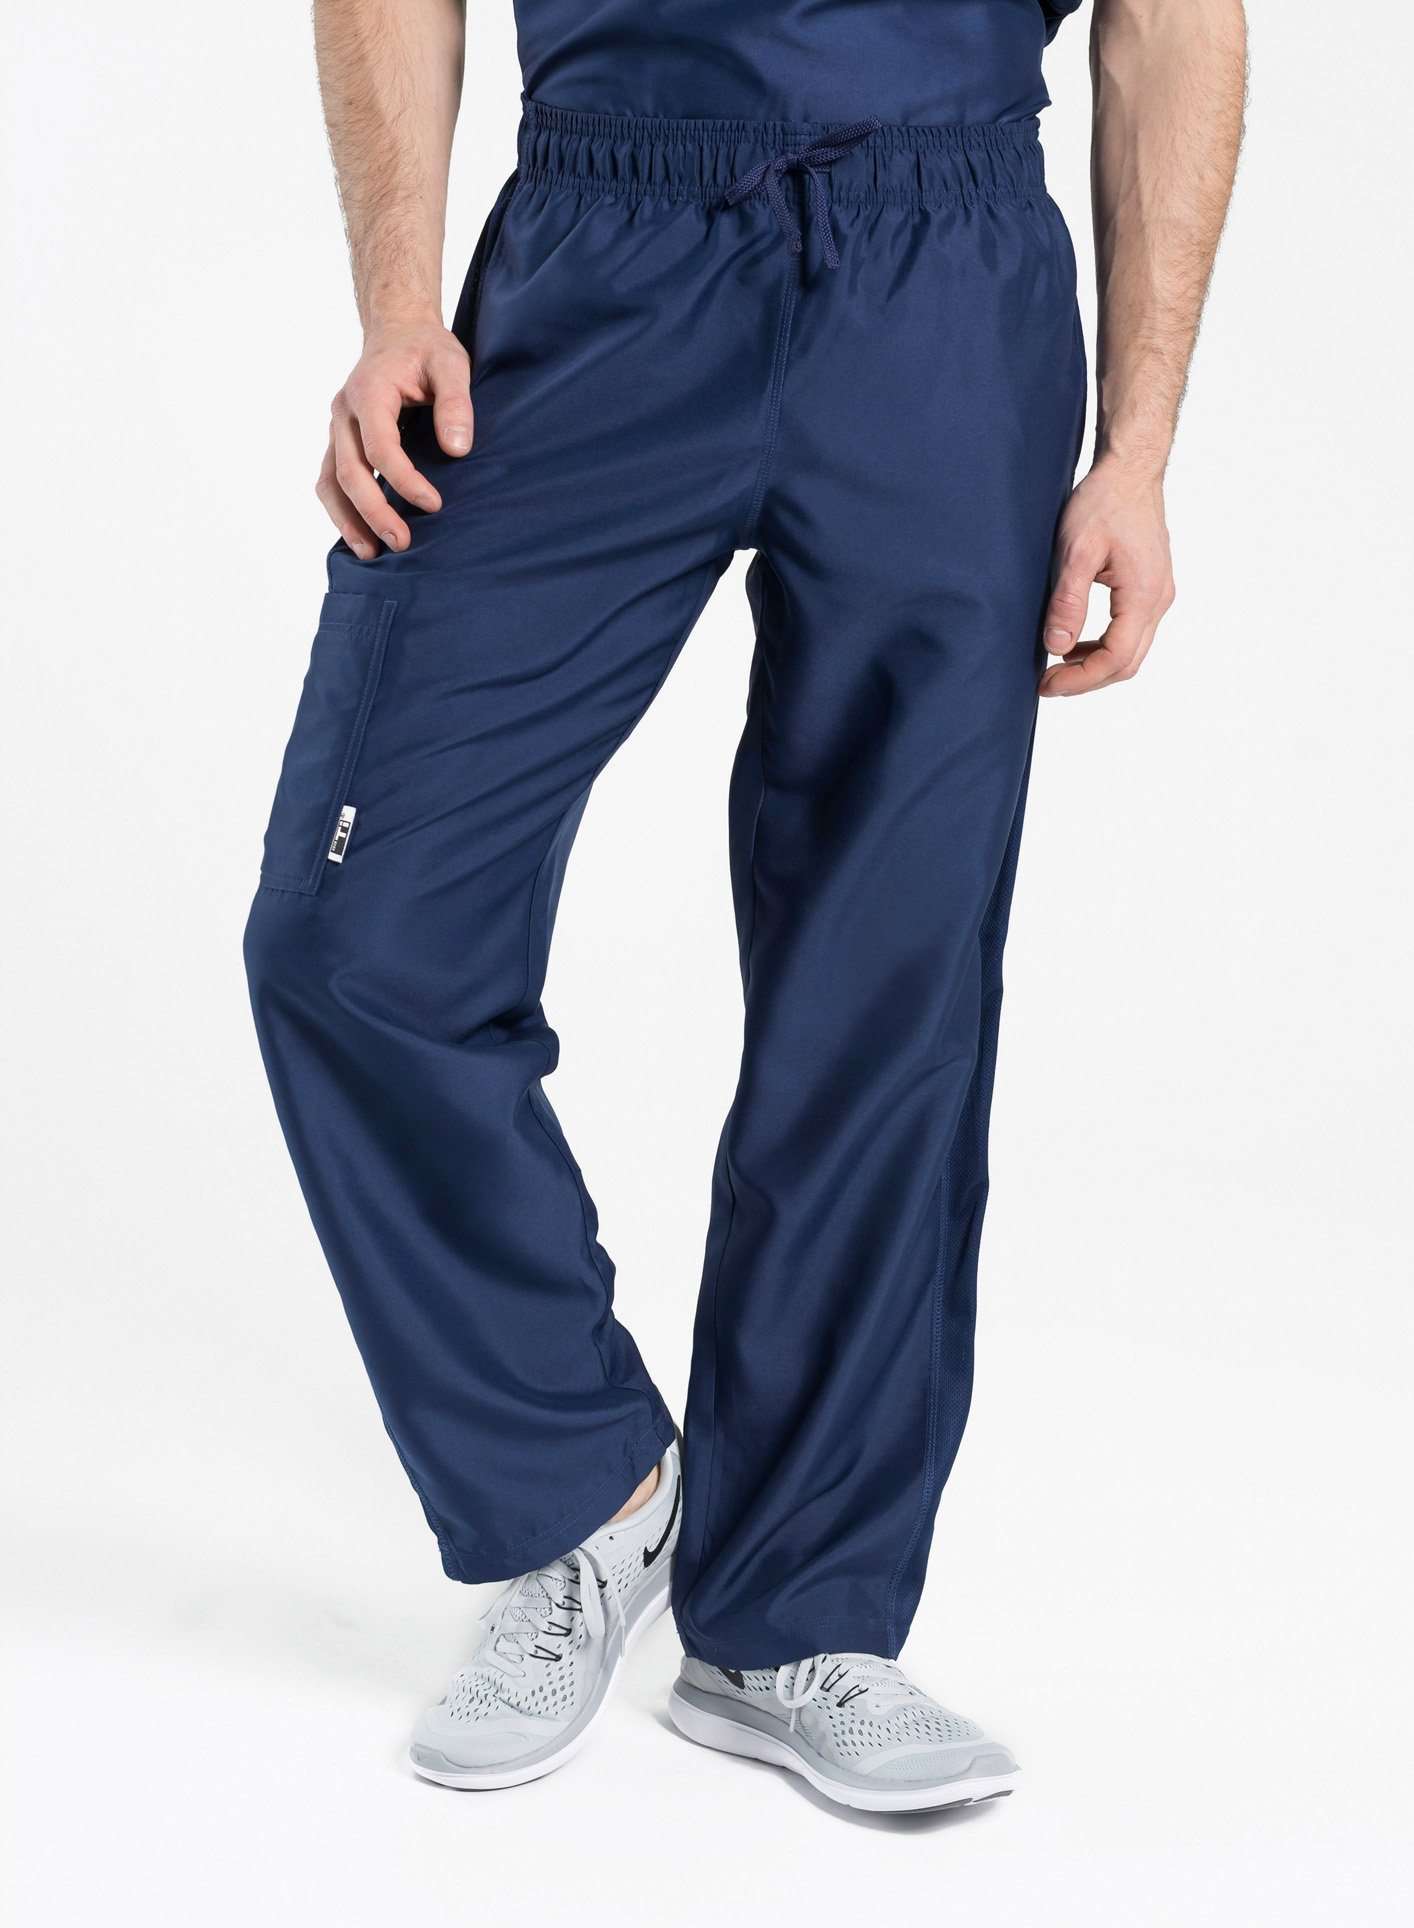 mens Elements short and tall relaxed fit scrub pants navy-blue